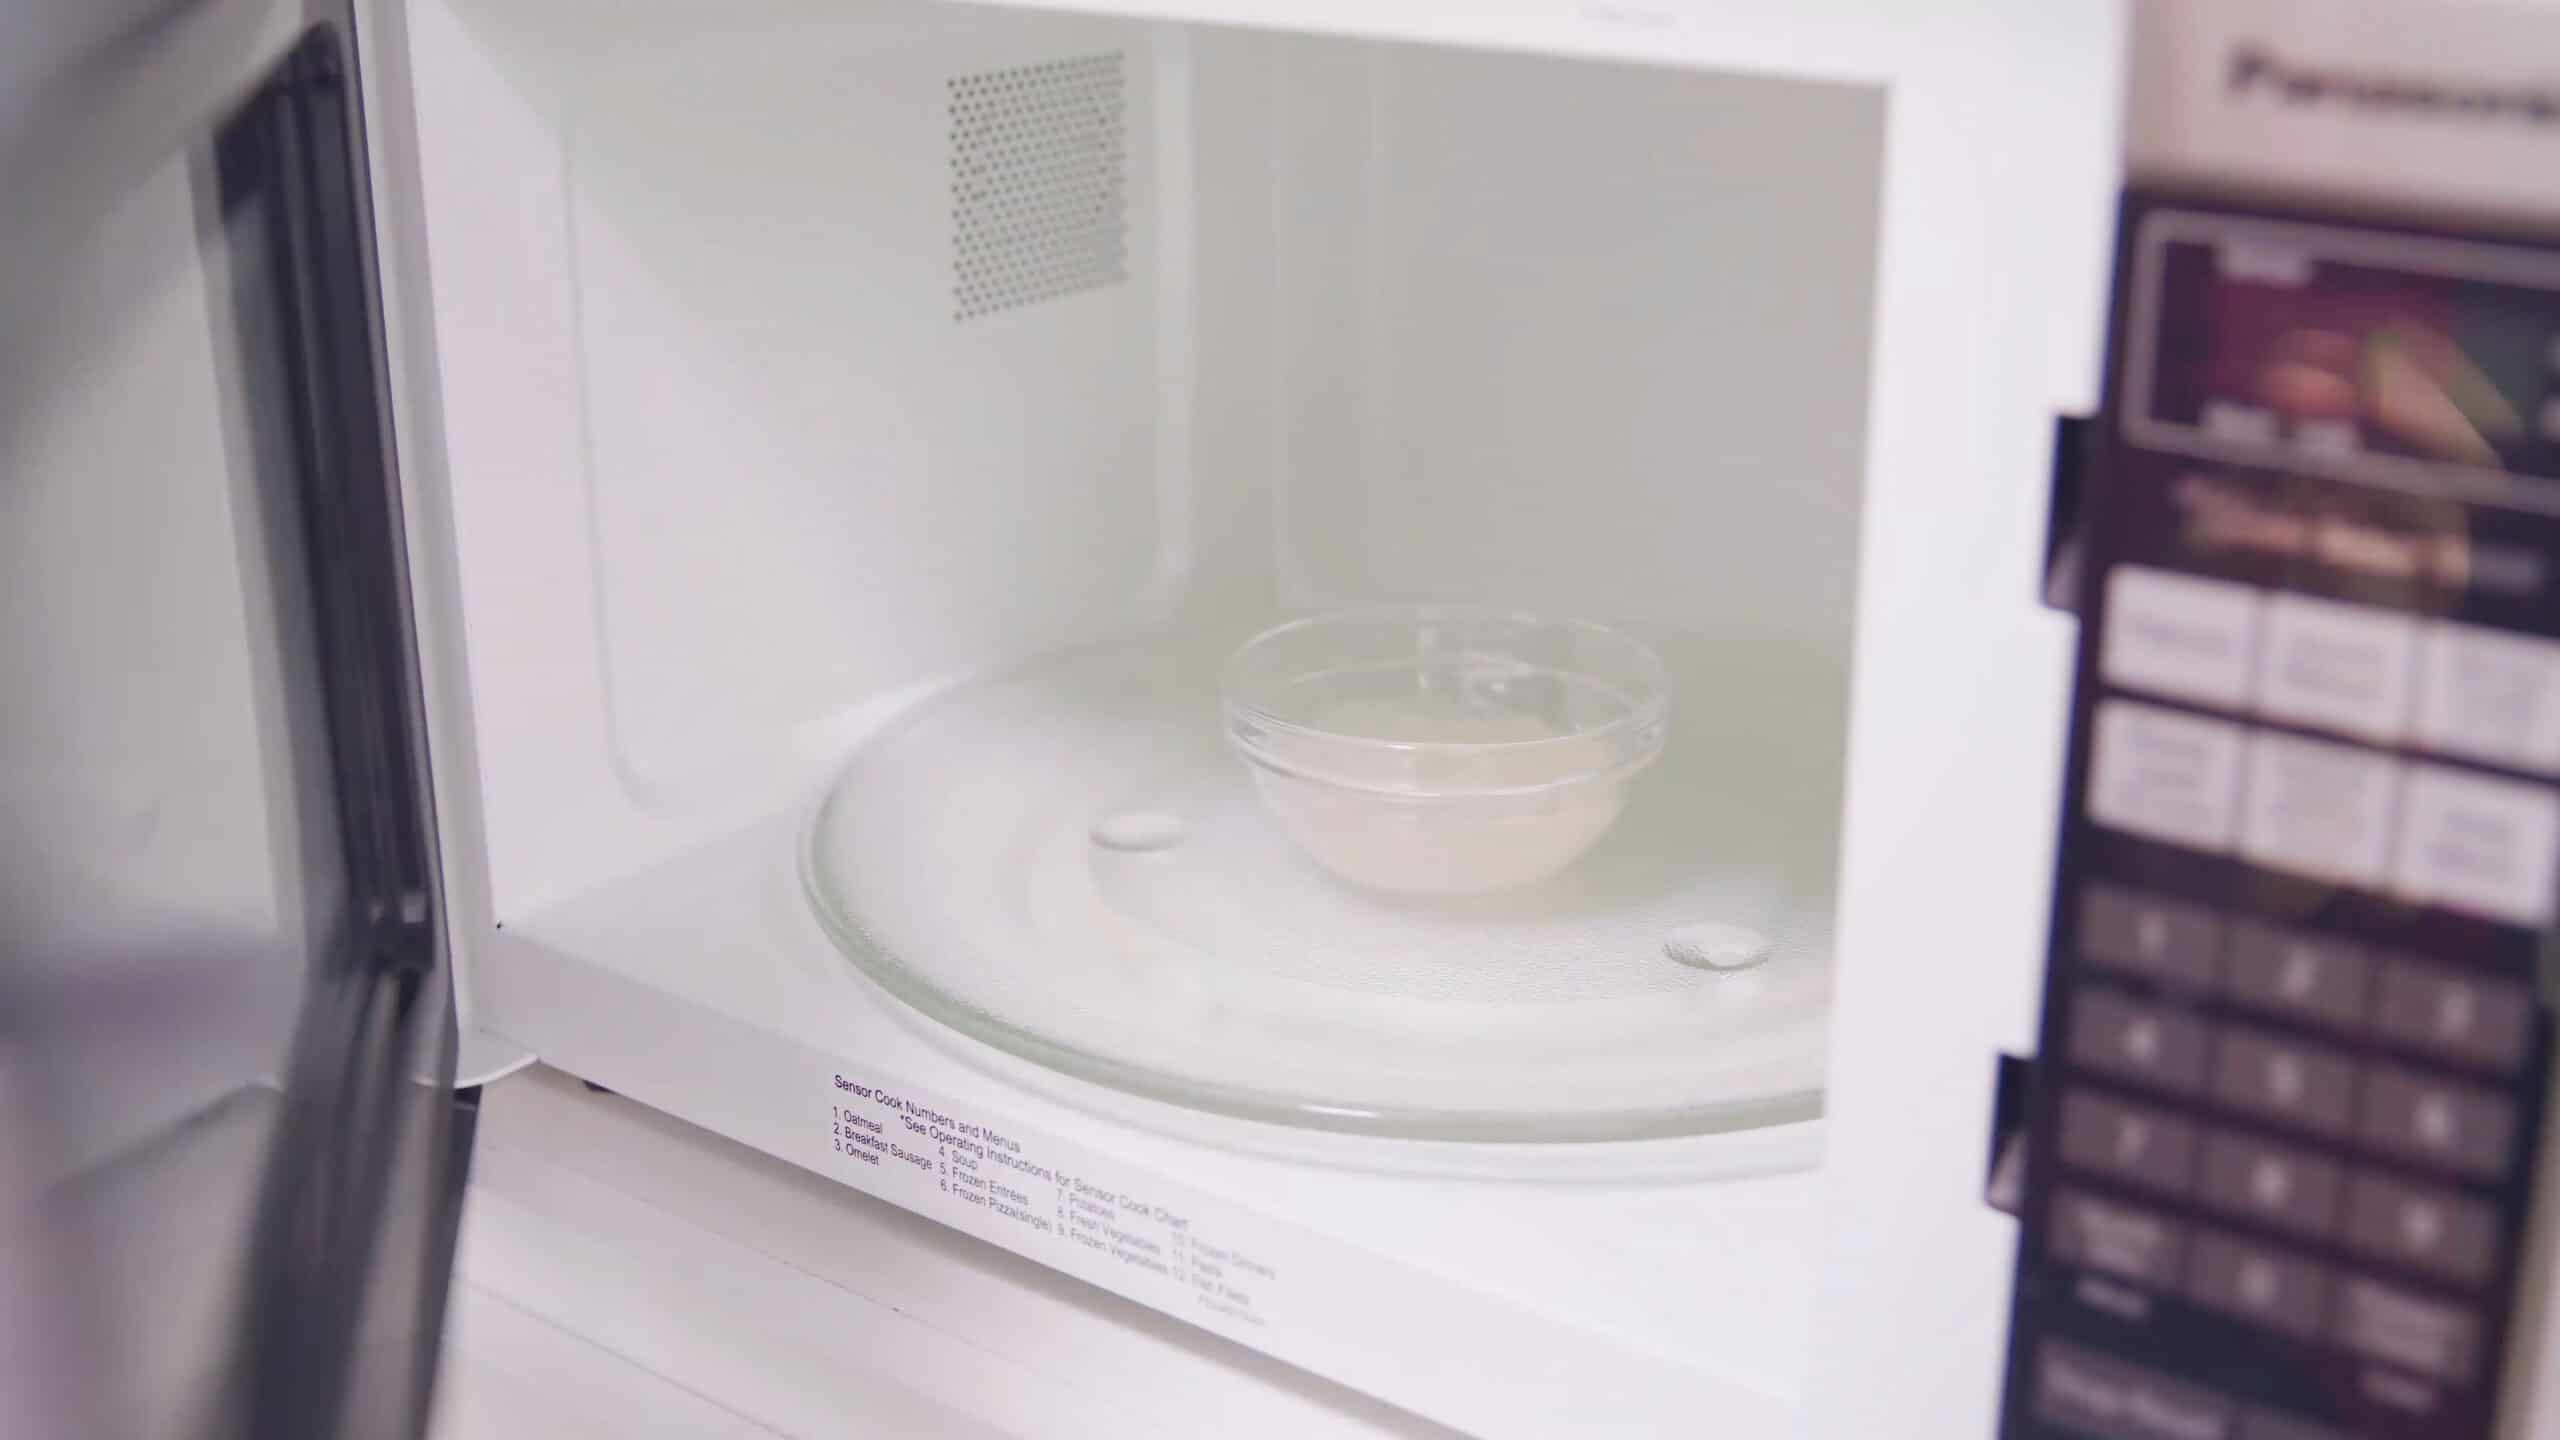 Angled view of open microwave with view of small glass bowl filled with gelatin that is intended to add to the whipped cream topping.